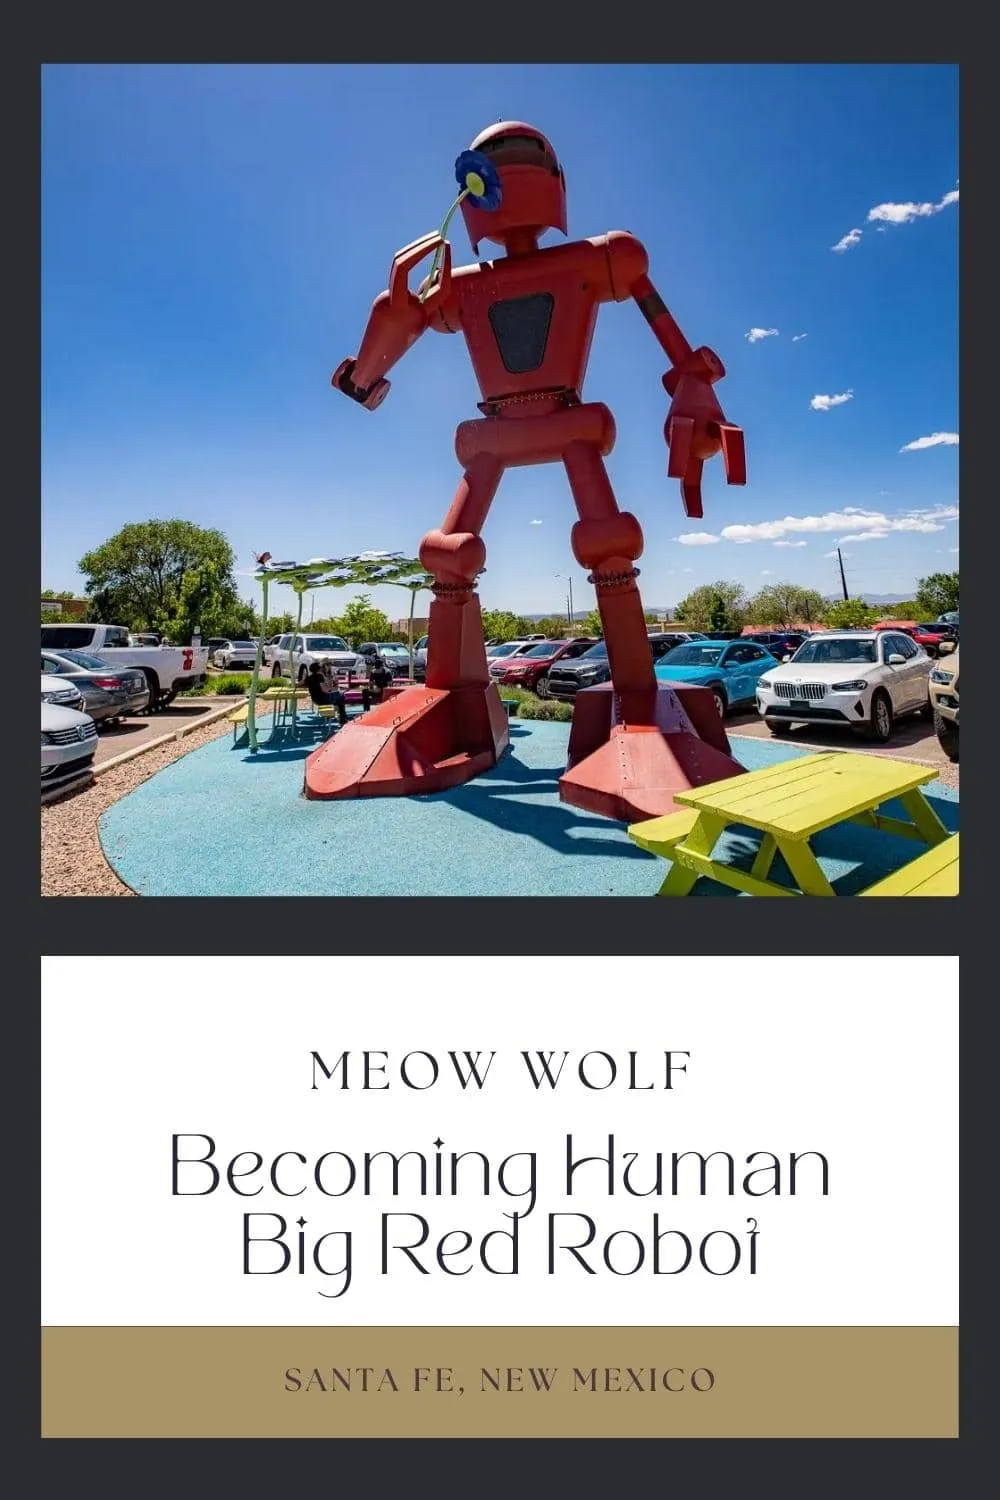 I love this roadside attraction a BOT! Find Becoming Human", the big red robot sculpture in front of Meow Wolf in Santa Fe, New Mexico. The big red robot in Meow Wolf's parking lot is officially titled "Becoming Human." The 30-foot tall art piece features a big robot smelling a big flower, and was designed by artist Christian Ristow. Find the roadside attraction at Meow Wolf Santa Fe House of Eternal Return. #MeowWolf #RoadsideAttraction #RoadsideAttractions #NewMexicoRoadsideAttraction